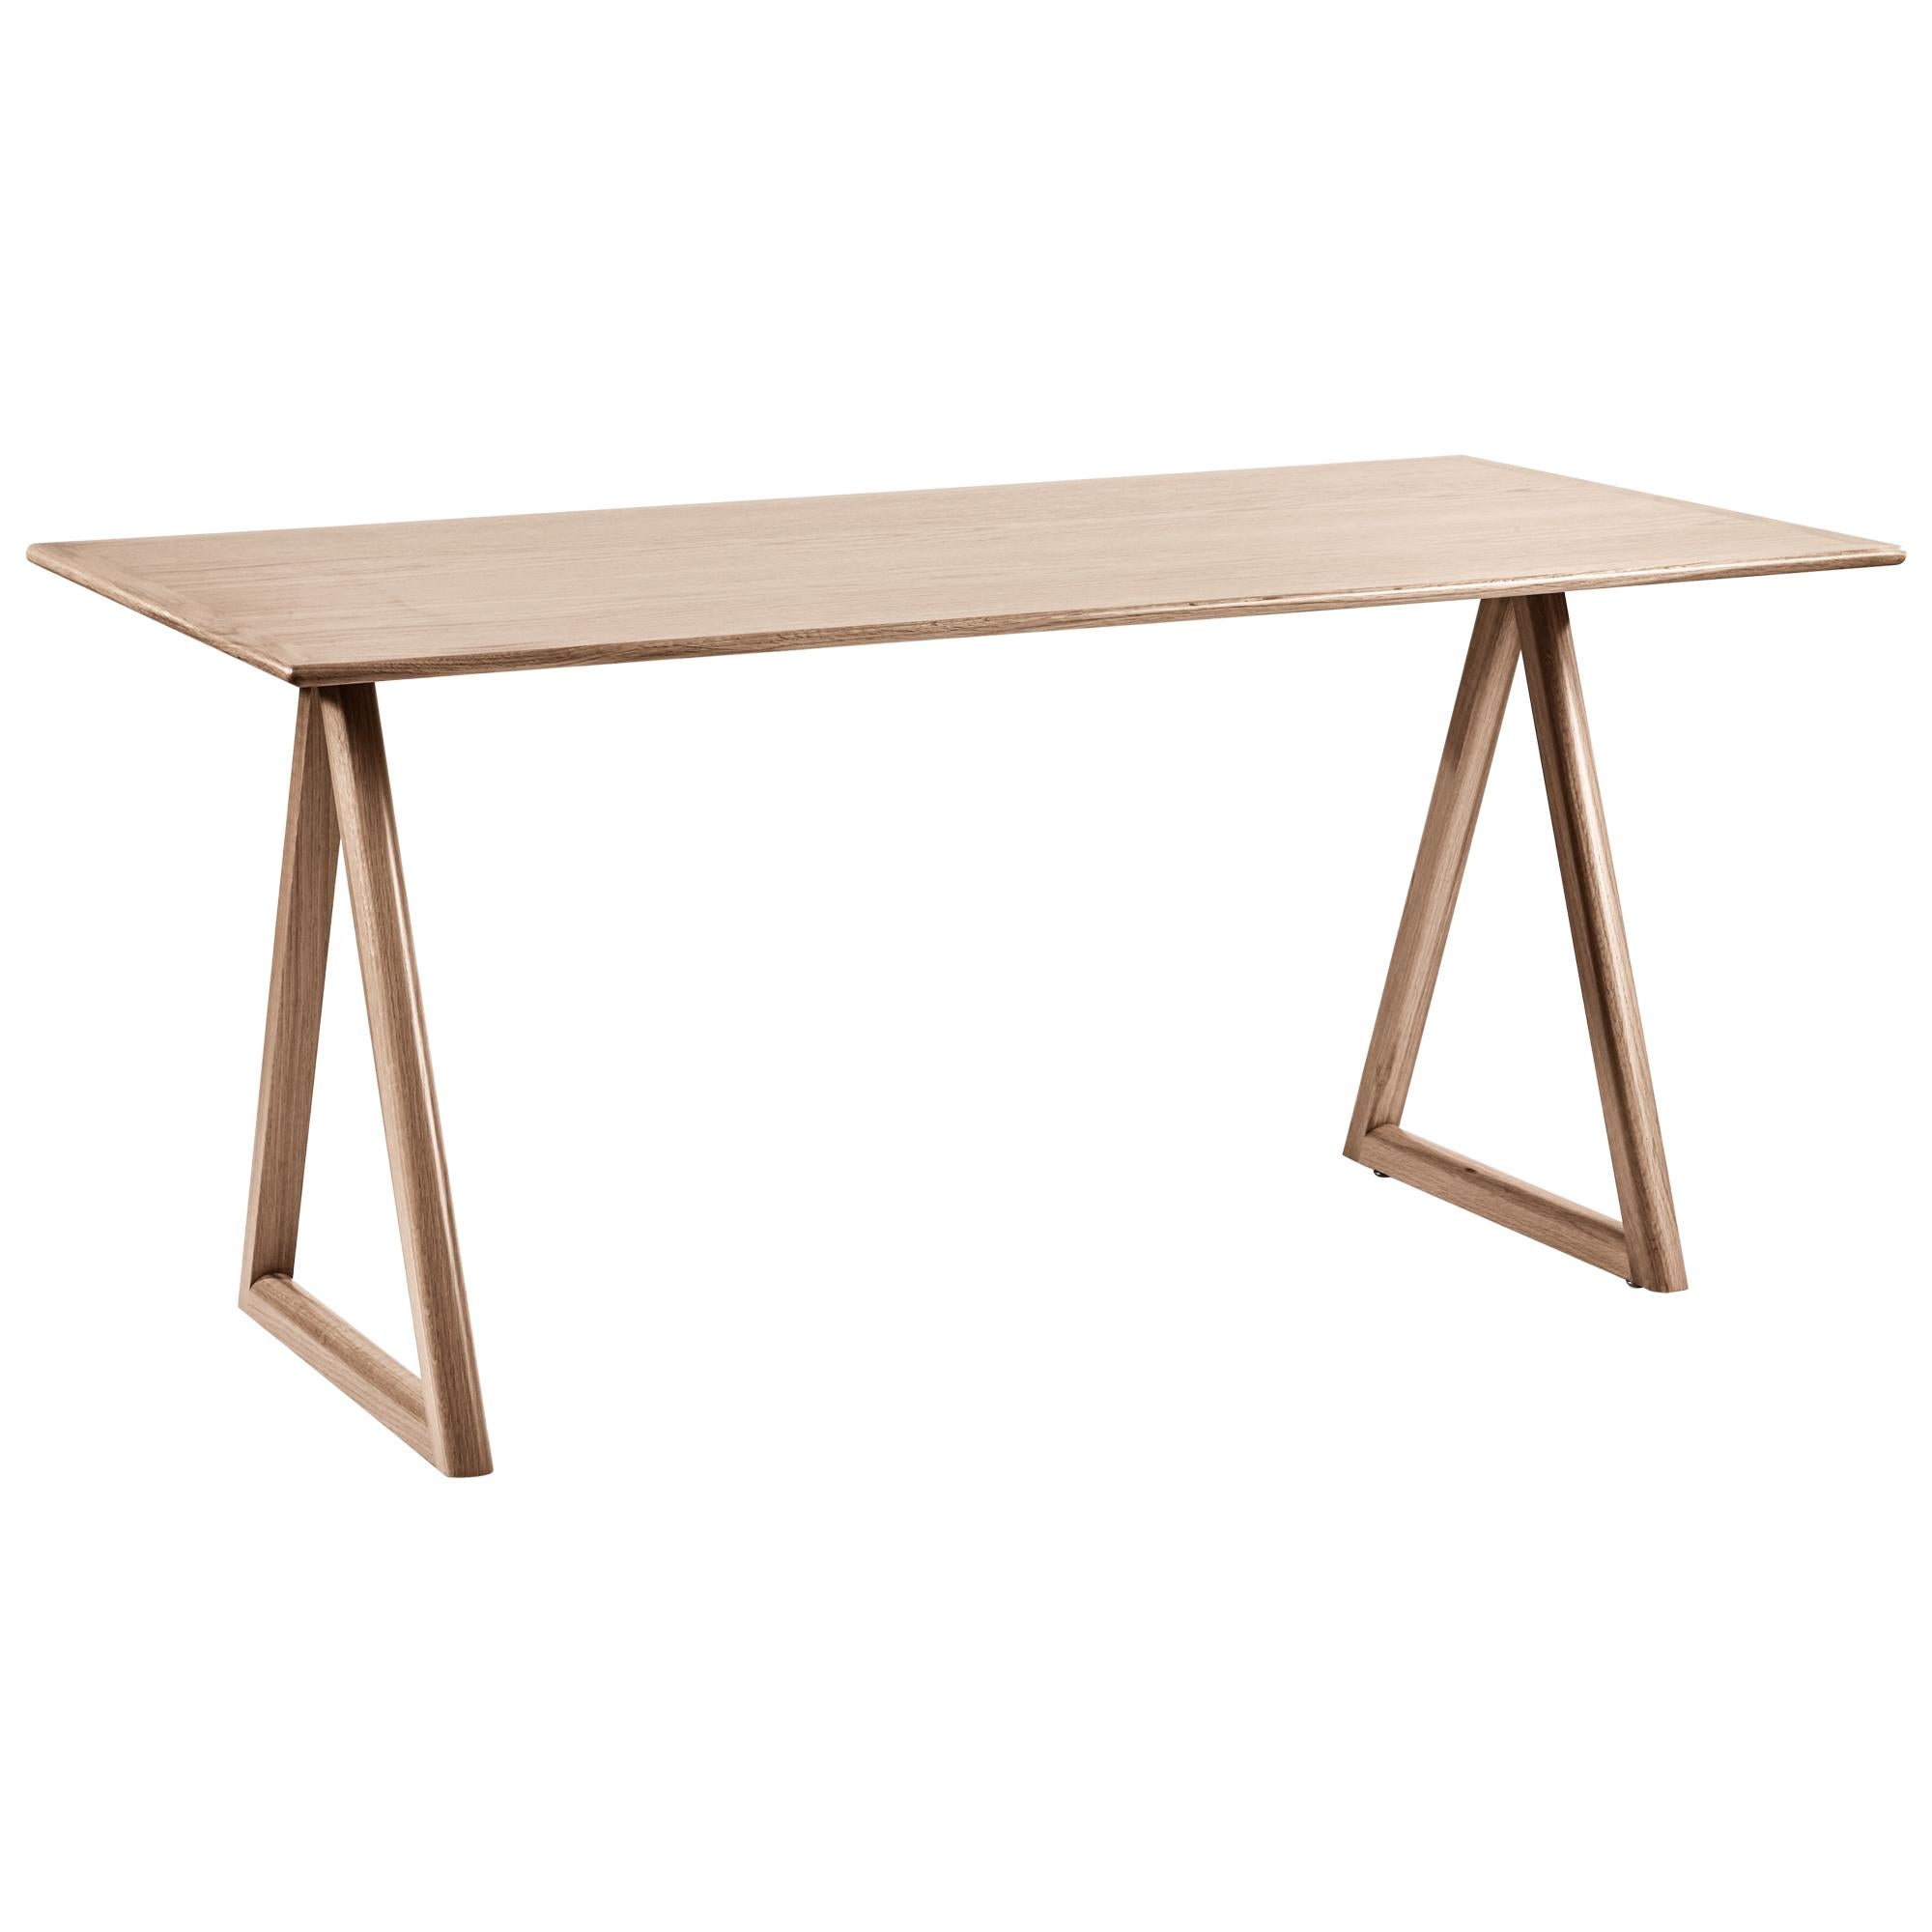 Porter Table in White Oak with Triangular Base by August Abode